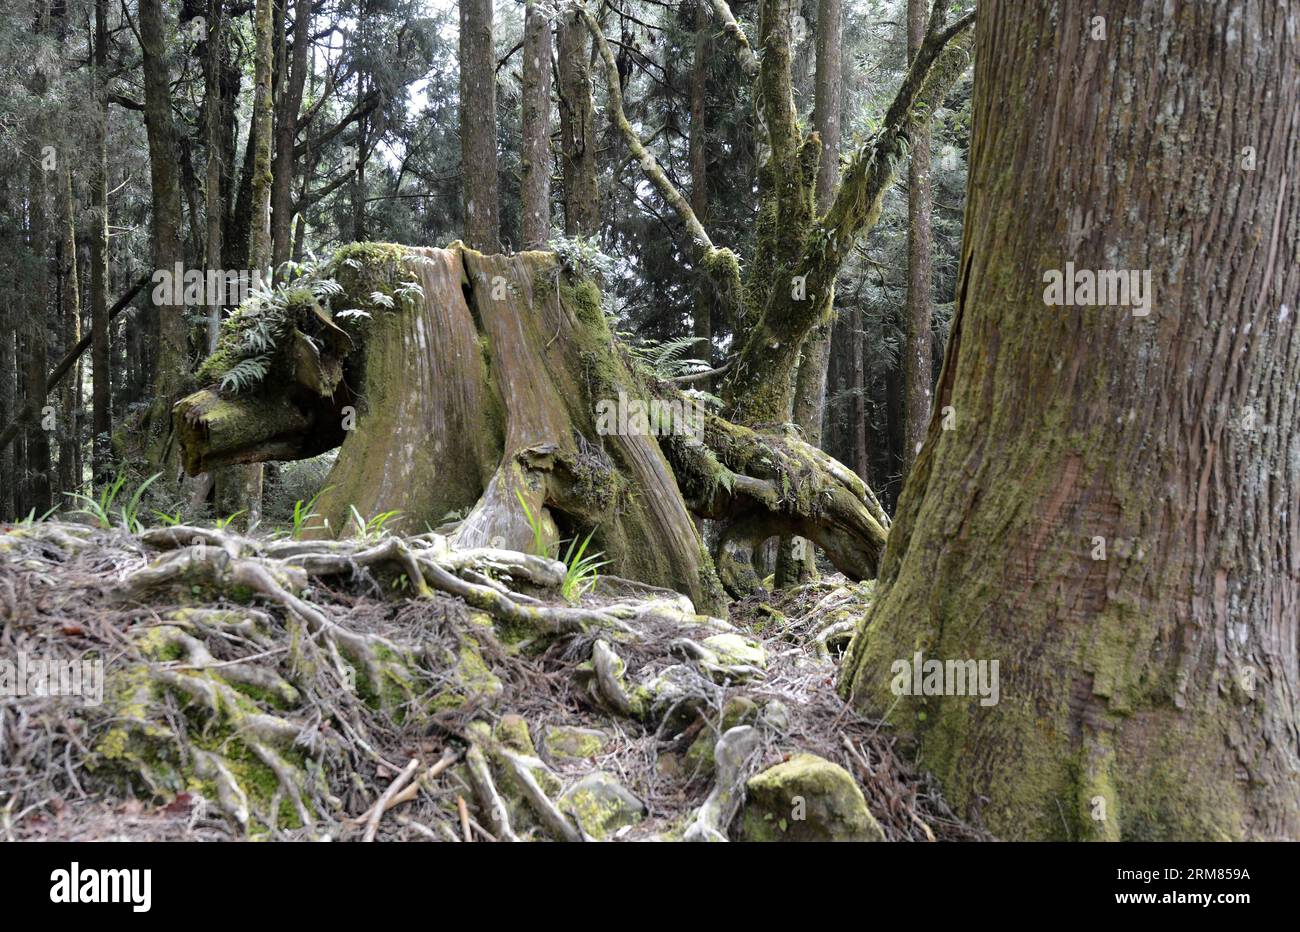 (140328) -- CHIAYI, March 28, 2014 (Xinhua) -- Photo taken on March 28, 2014 shows a Formosan cypress stump in the Ali Mountain in Chiayi County, southeast China s Taiwan. The Ali Mountain in central Taiwan is home to an abundance of Formosan cypresses (Chamaecyparis formosensis), which are an endemic species. During Taiwan s Japanese occupation period (1895-1945), the Formosan cypresses of the Ali Mountain were shipped to Japan in substantial amounts for architectural use. Still, a considerable number of them outlived the Japanese looting and natural disasters. (Xinhua/Huang Xiaoyong) (lmm) C Stock Photo